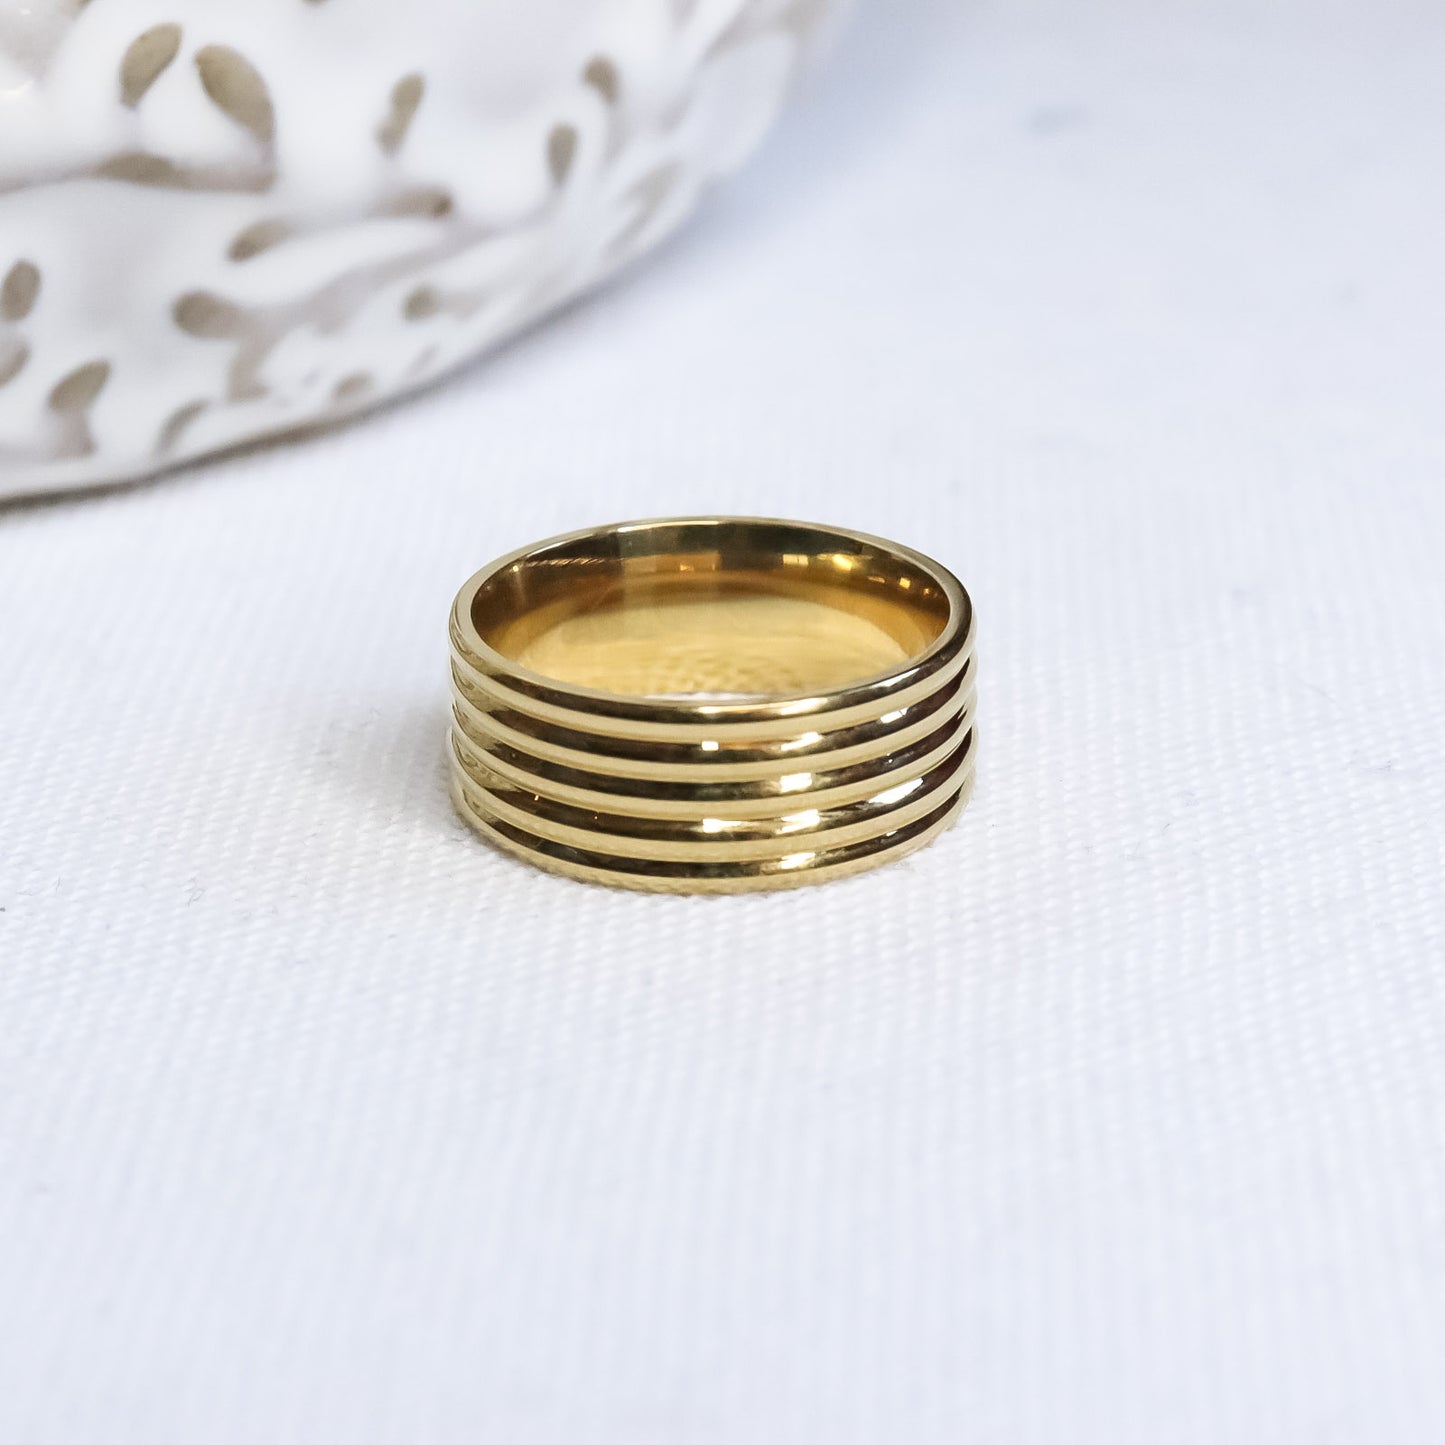 Gold Waterproof Ring - Thick Band - Tarnish Proof Jewelry - Gold Thick Ring - Fierce Creative Co